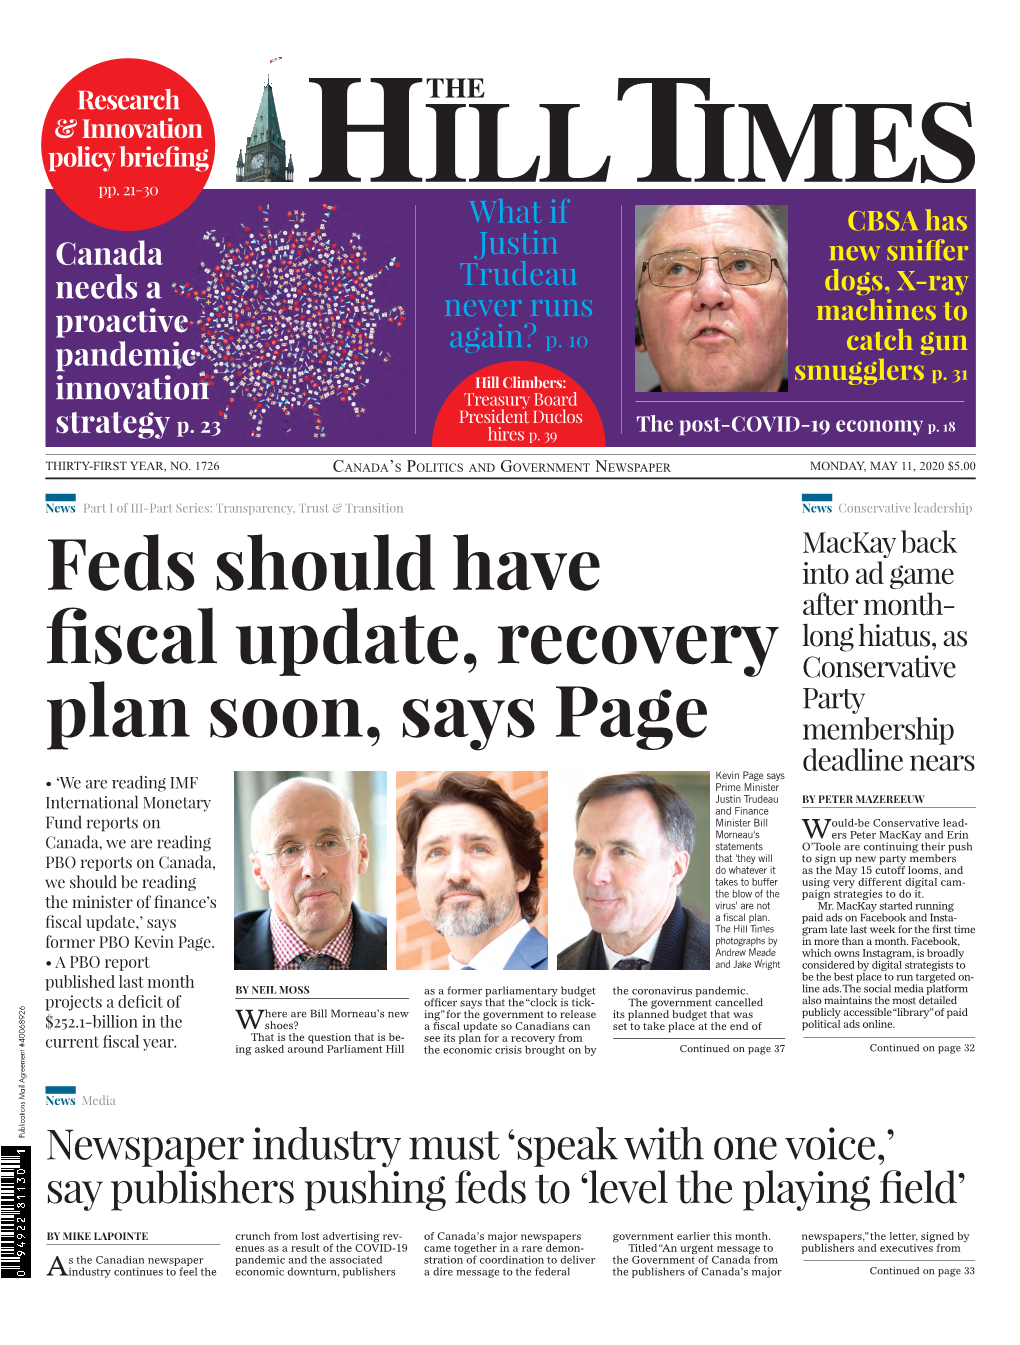 Feds Should Have Fiscal Update, Recovery Plan Soon, Says Page